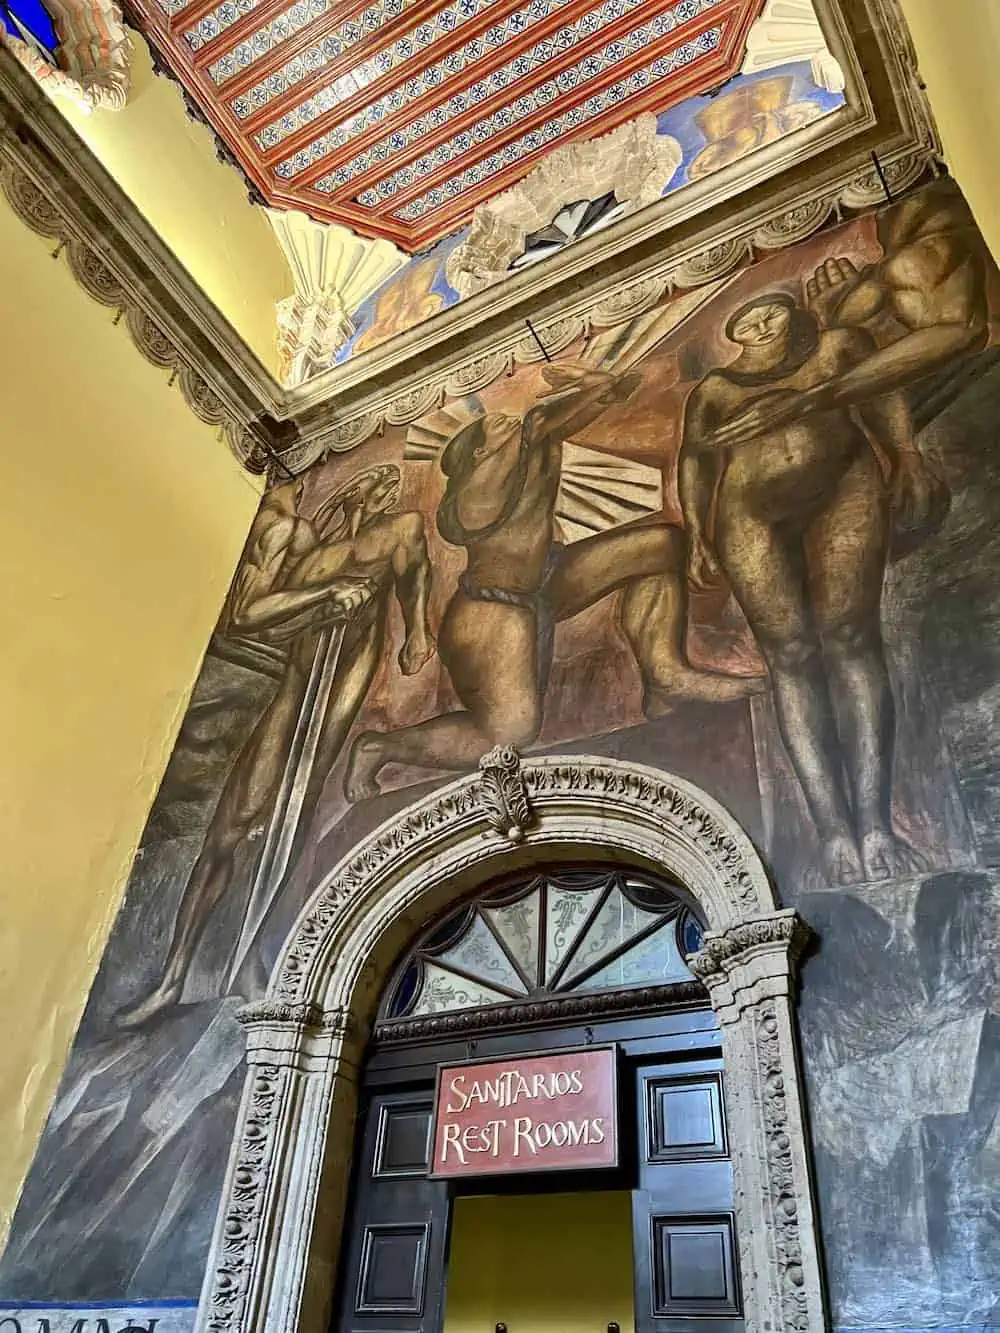 Mural by José Clemente Orozco at Sanborns in Mexico City.